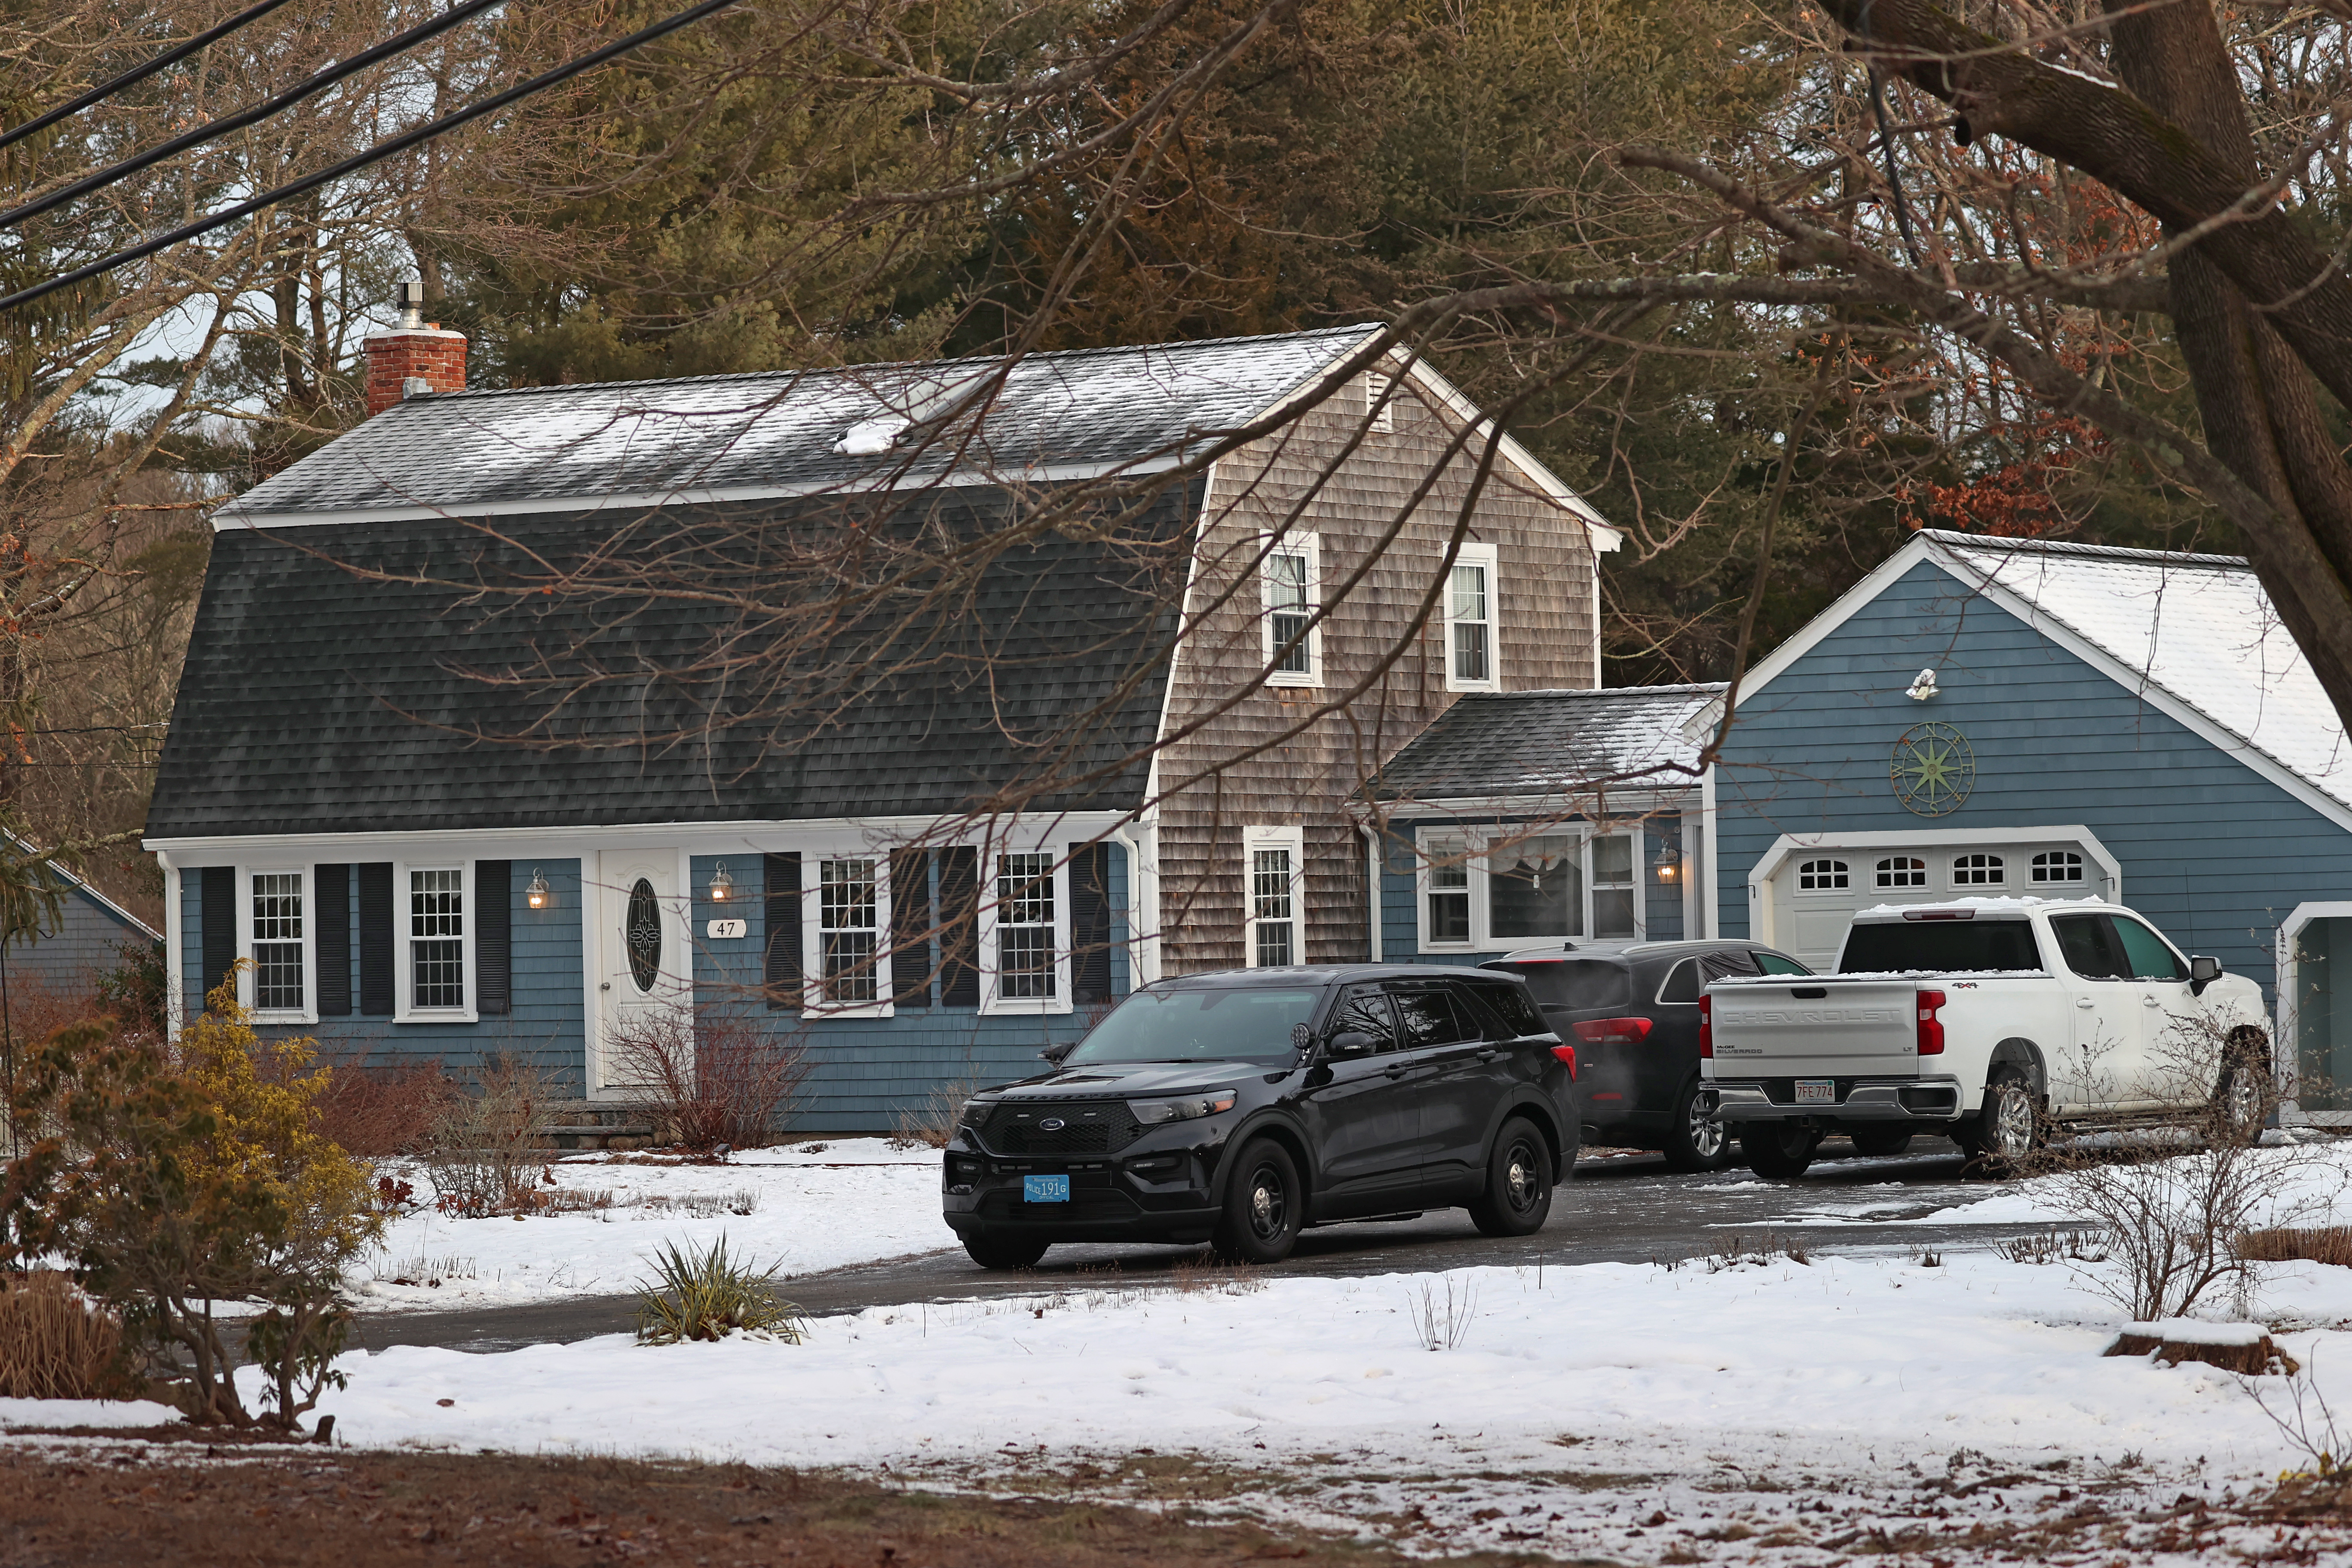 Getty Images via The Boston Globe, the bodies of two deceased children were discovered in a residence on Summer Street in Duxbury, Massachusetts. A man reported that a woman, who had attempted to kill herself, called the fire and police to the home.